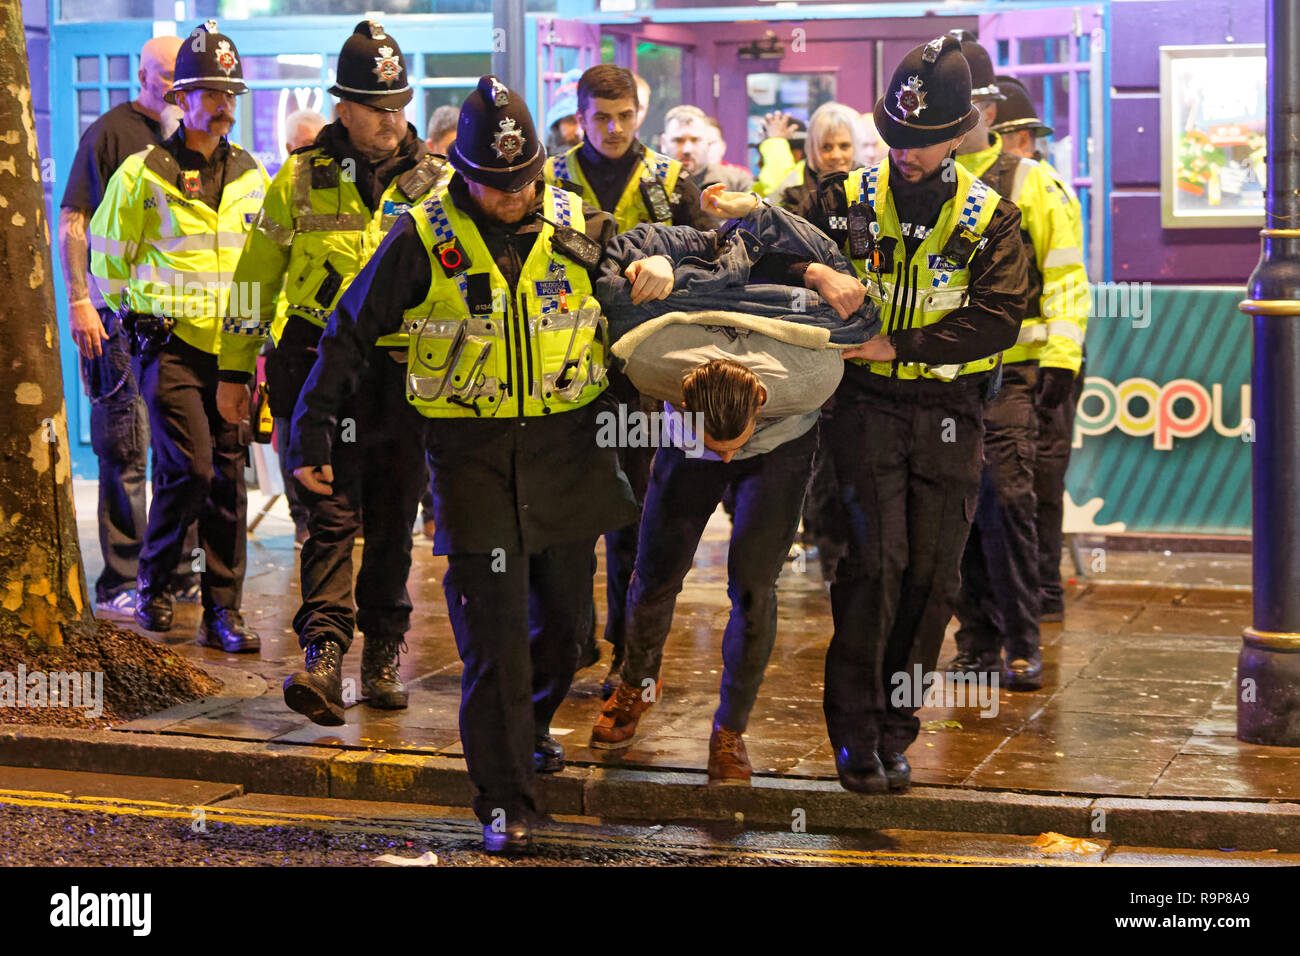 Pictured: A man is handcuffed and removed by police officers in Wind  Street, Swansea, south Wales, UK. Friday 21 December 2018 Re: Black Eye  Friday, a Stock Photo - Alamy